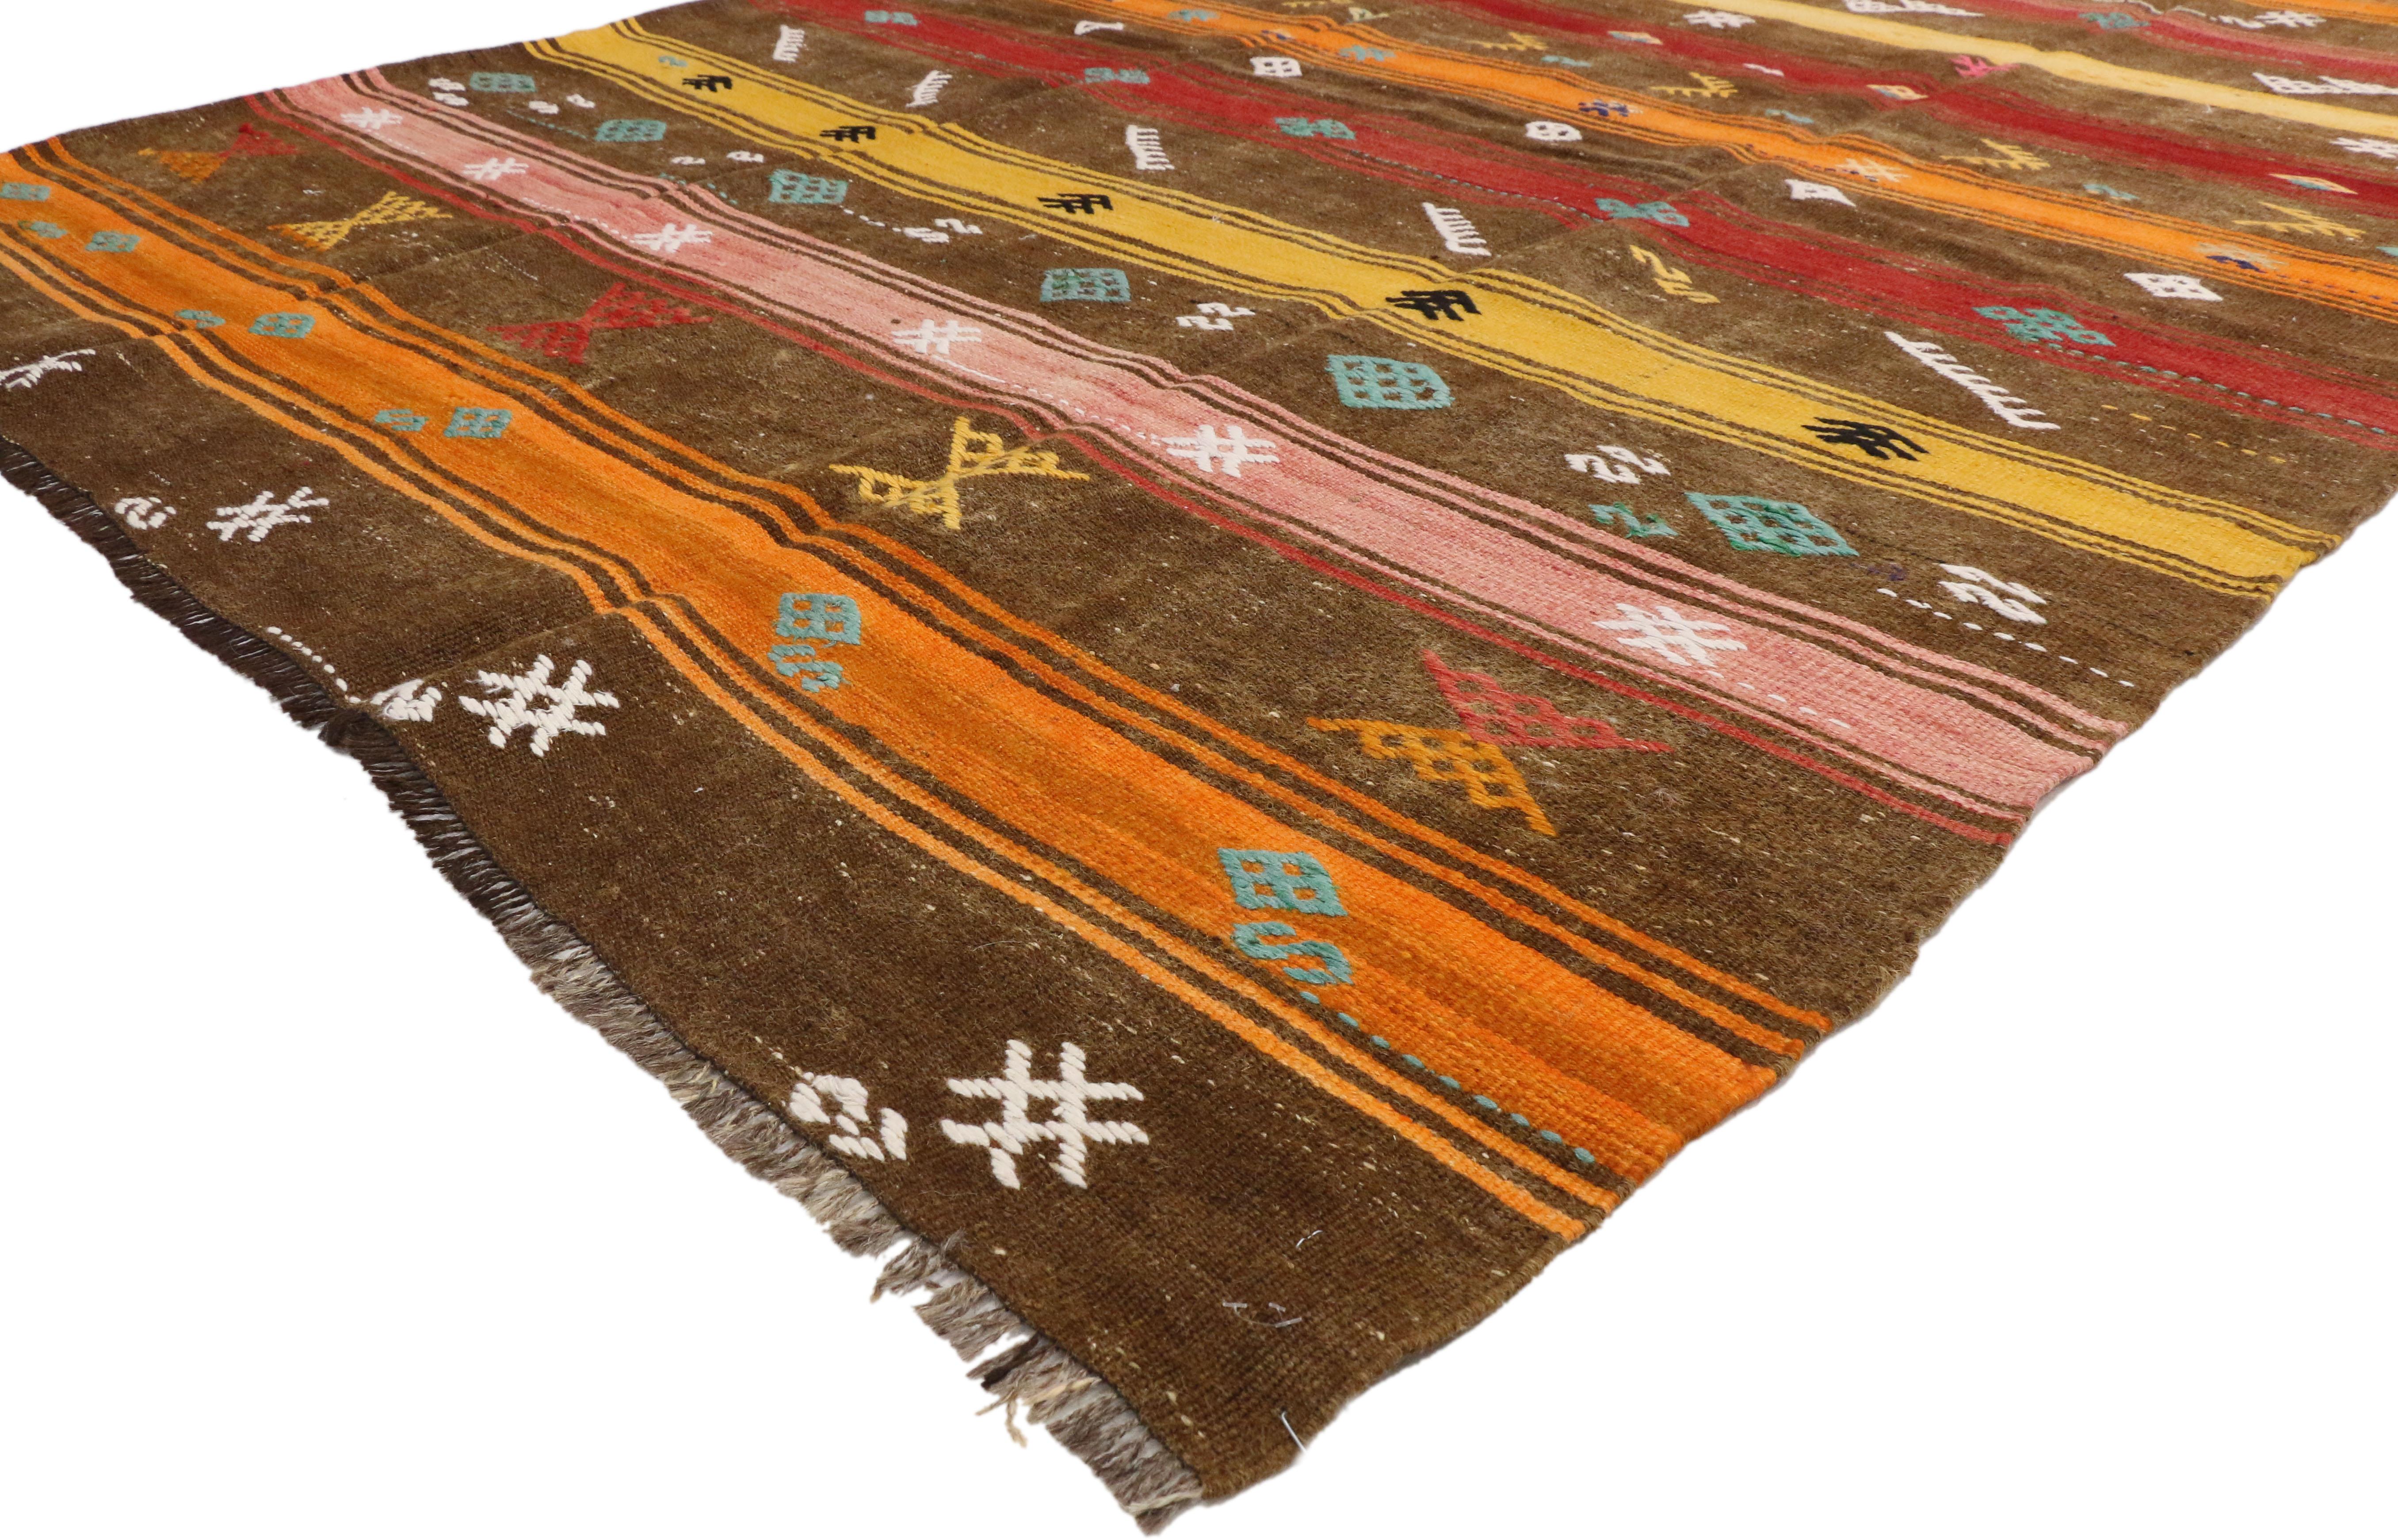 51074 Vintage Turkish Kilim Rug with Bohemian Tribal Design and Modern Cabin Style. Create a comfortable and modern setting with this hand-woven wool vintage Turkish Kilim rug. The flat-weave kilim rug features a variety of symbolic tribal motifs